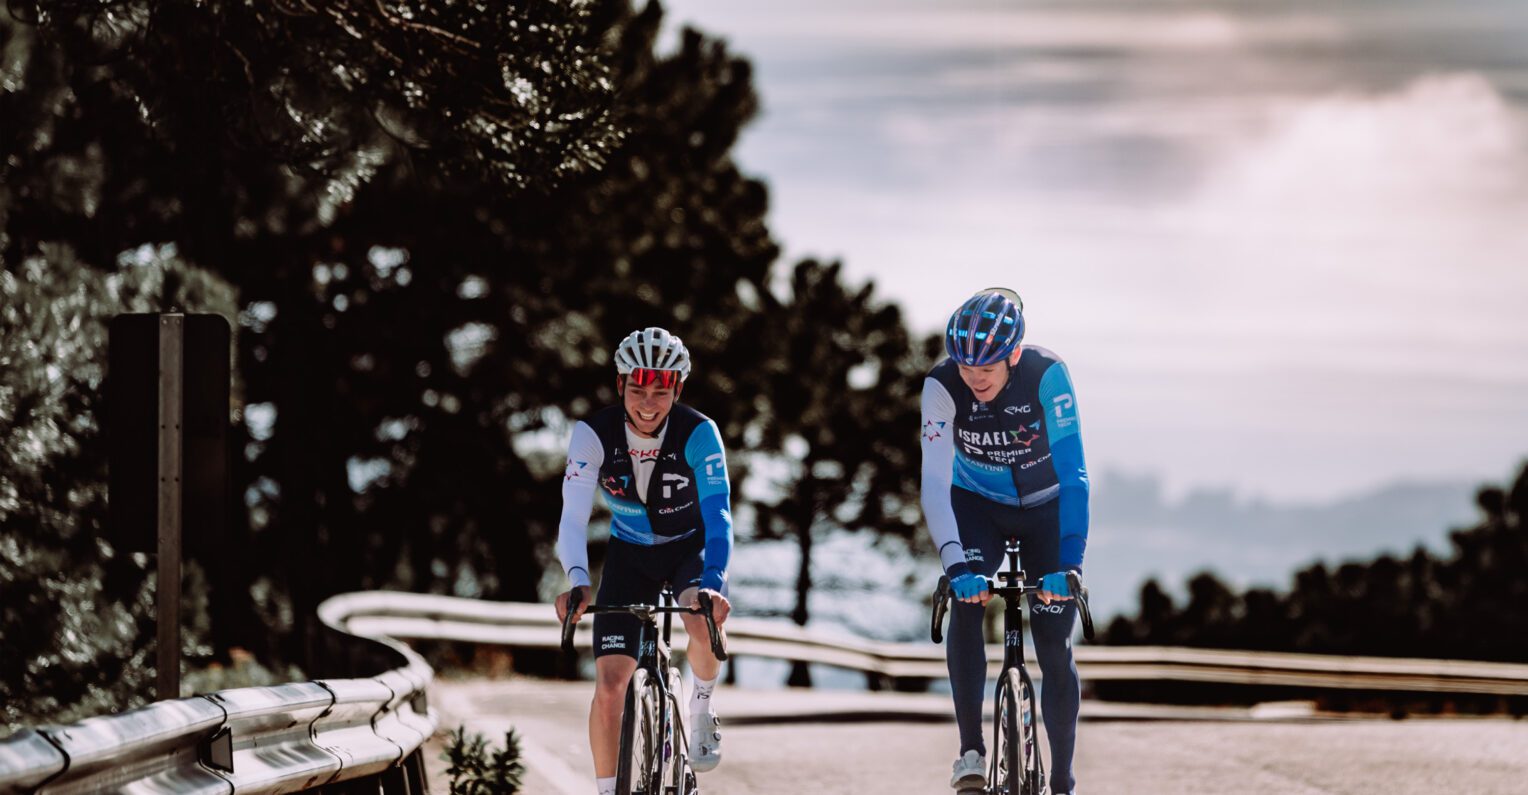 Mason Hollyman and Chris Froome riding together during IPT's Marbella training camp